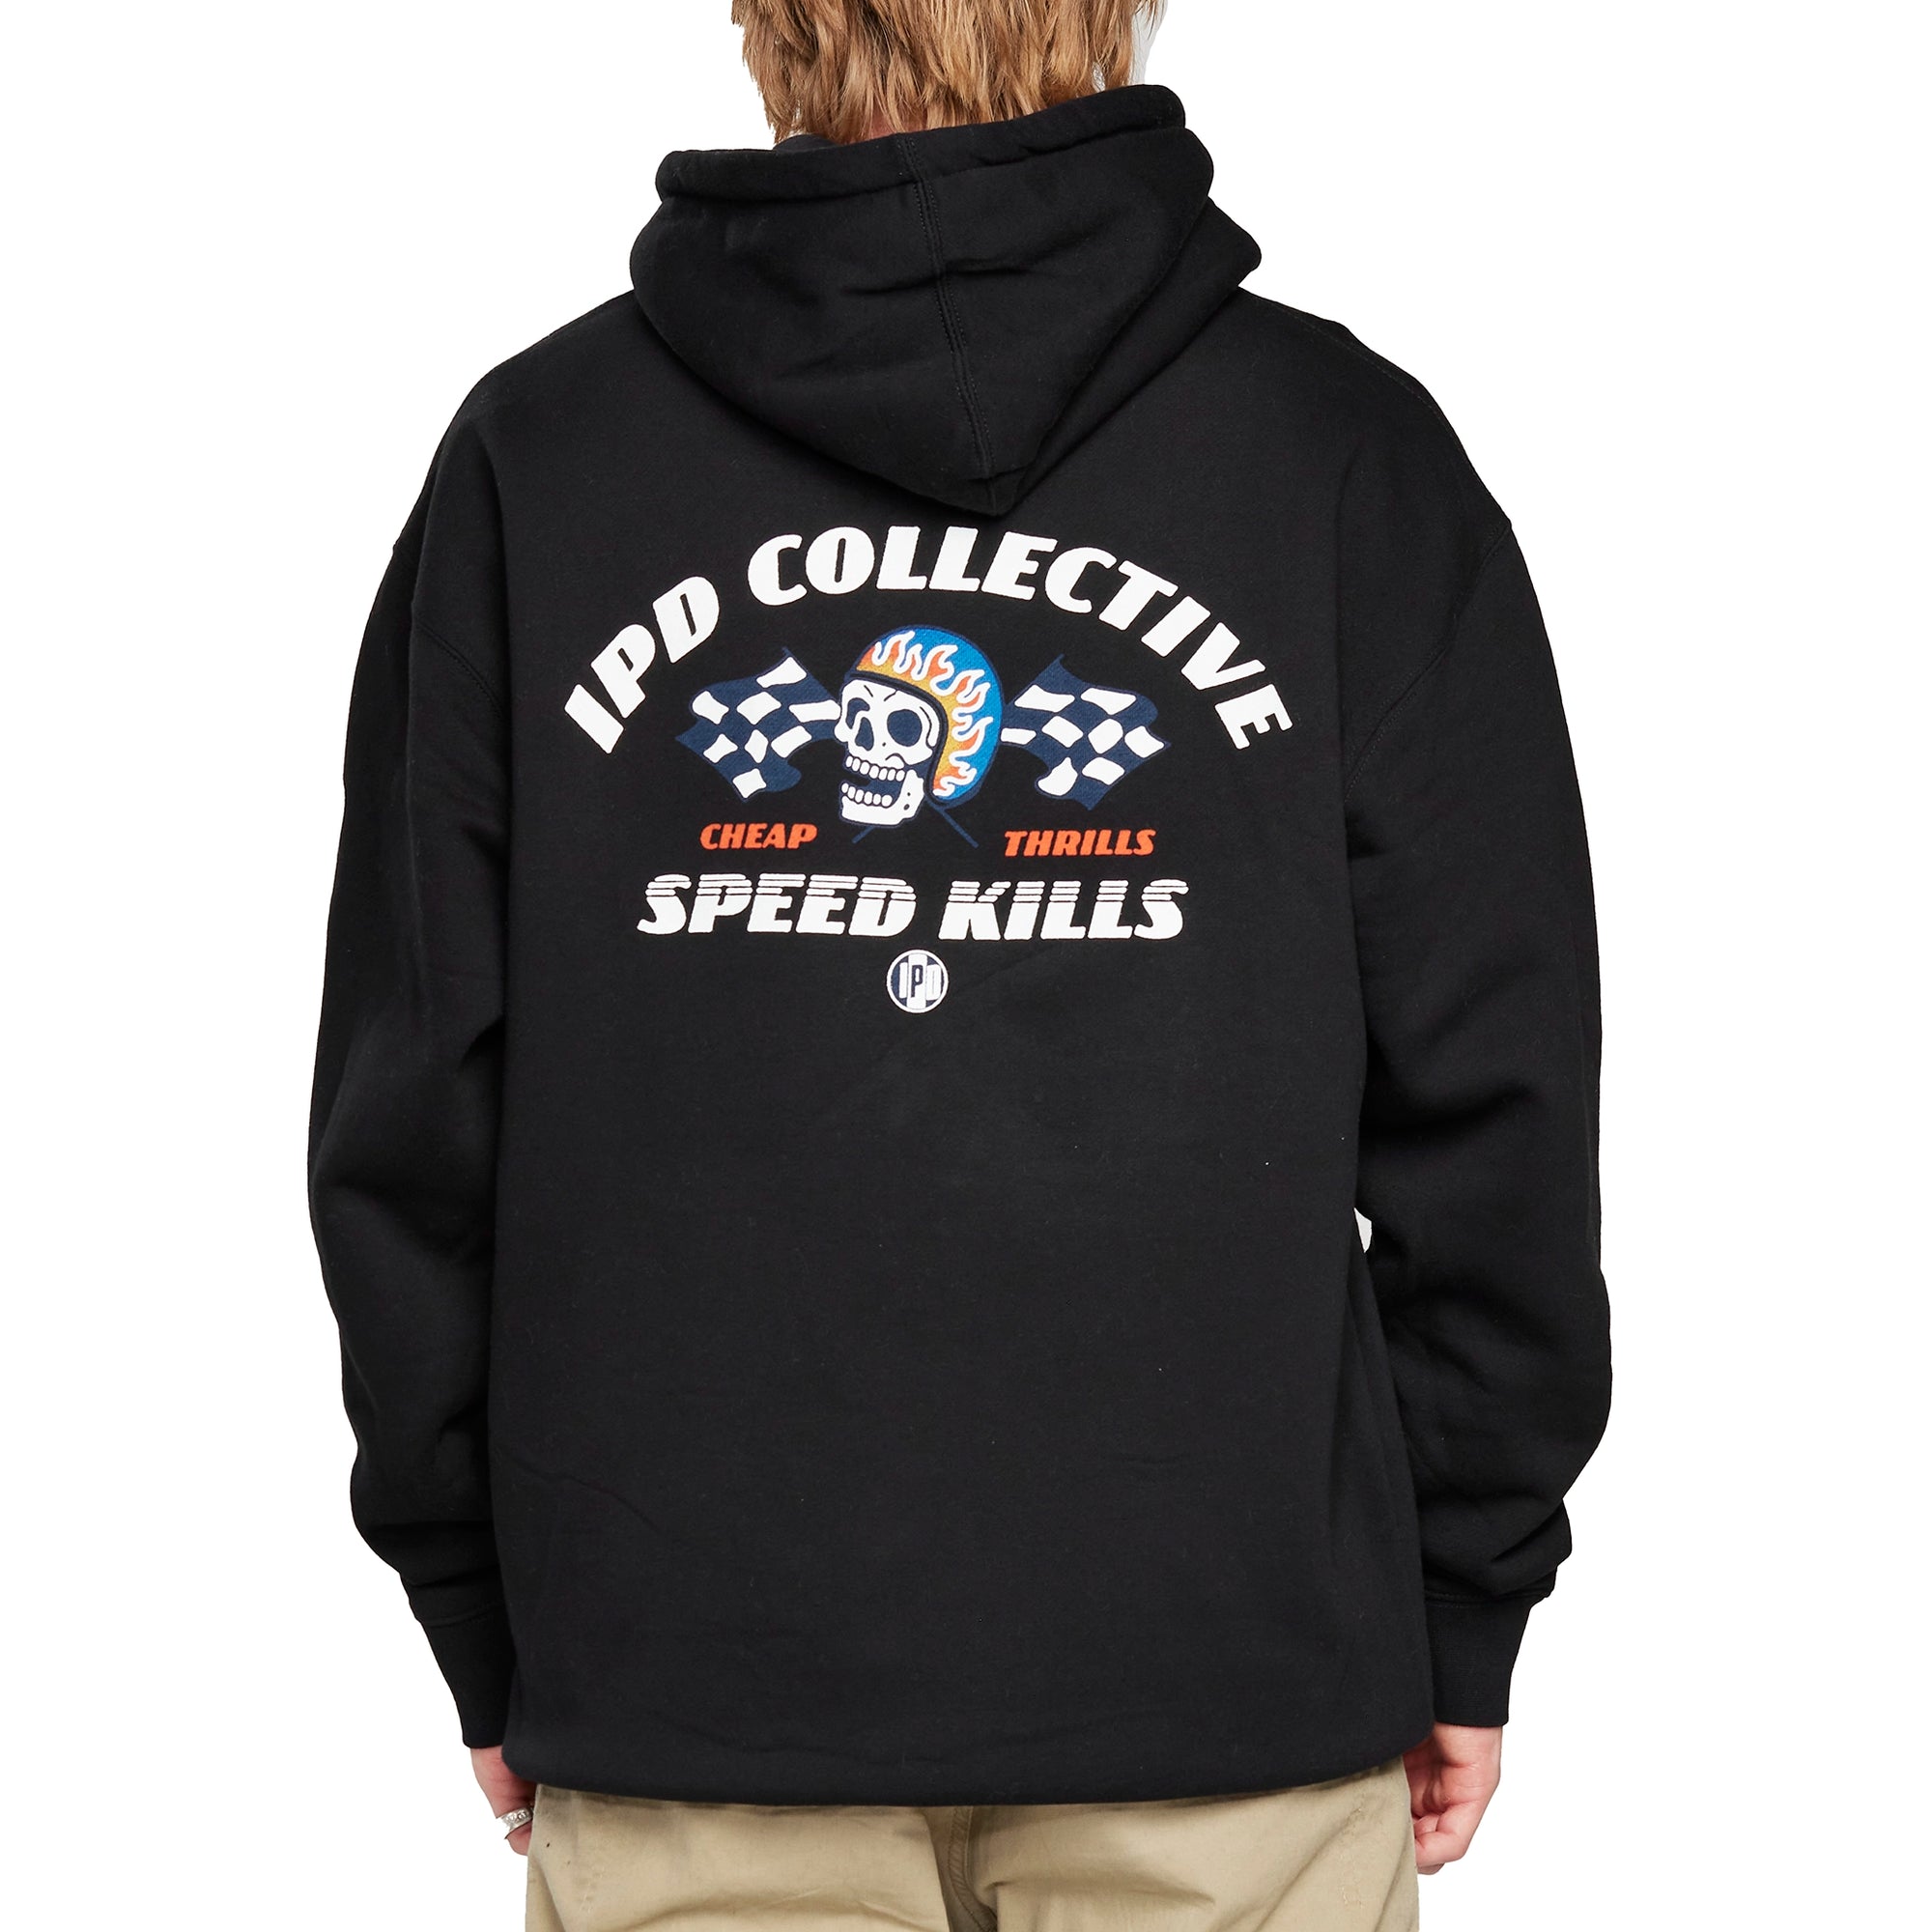 Back view of a white loose fitting fleece hoodie with a large print of a skull wearing a light blue racing helmet with flames in between two checkered flags with the words "I P D Collective" arching above and the words "Cheap Thrills" and "Speed Kills" below.